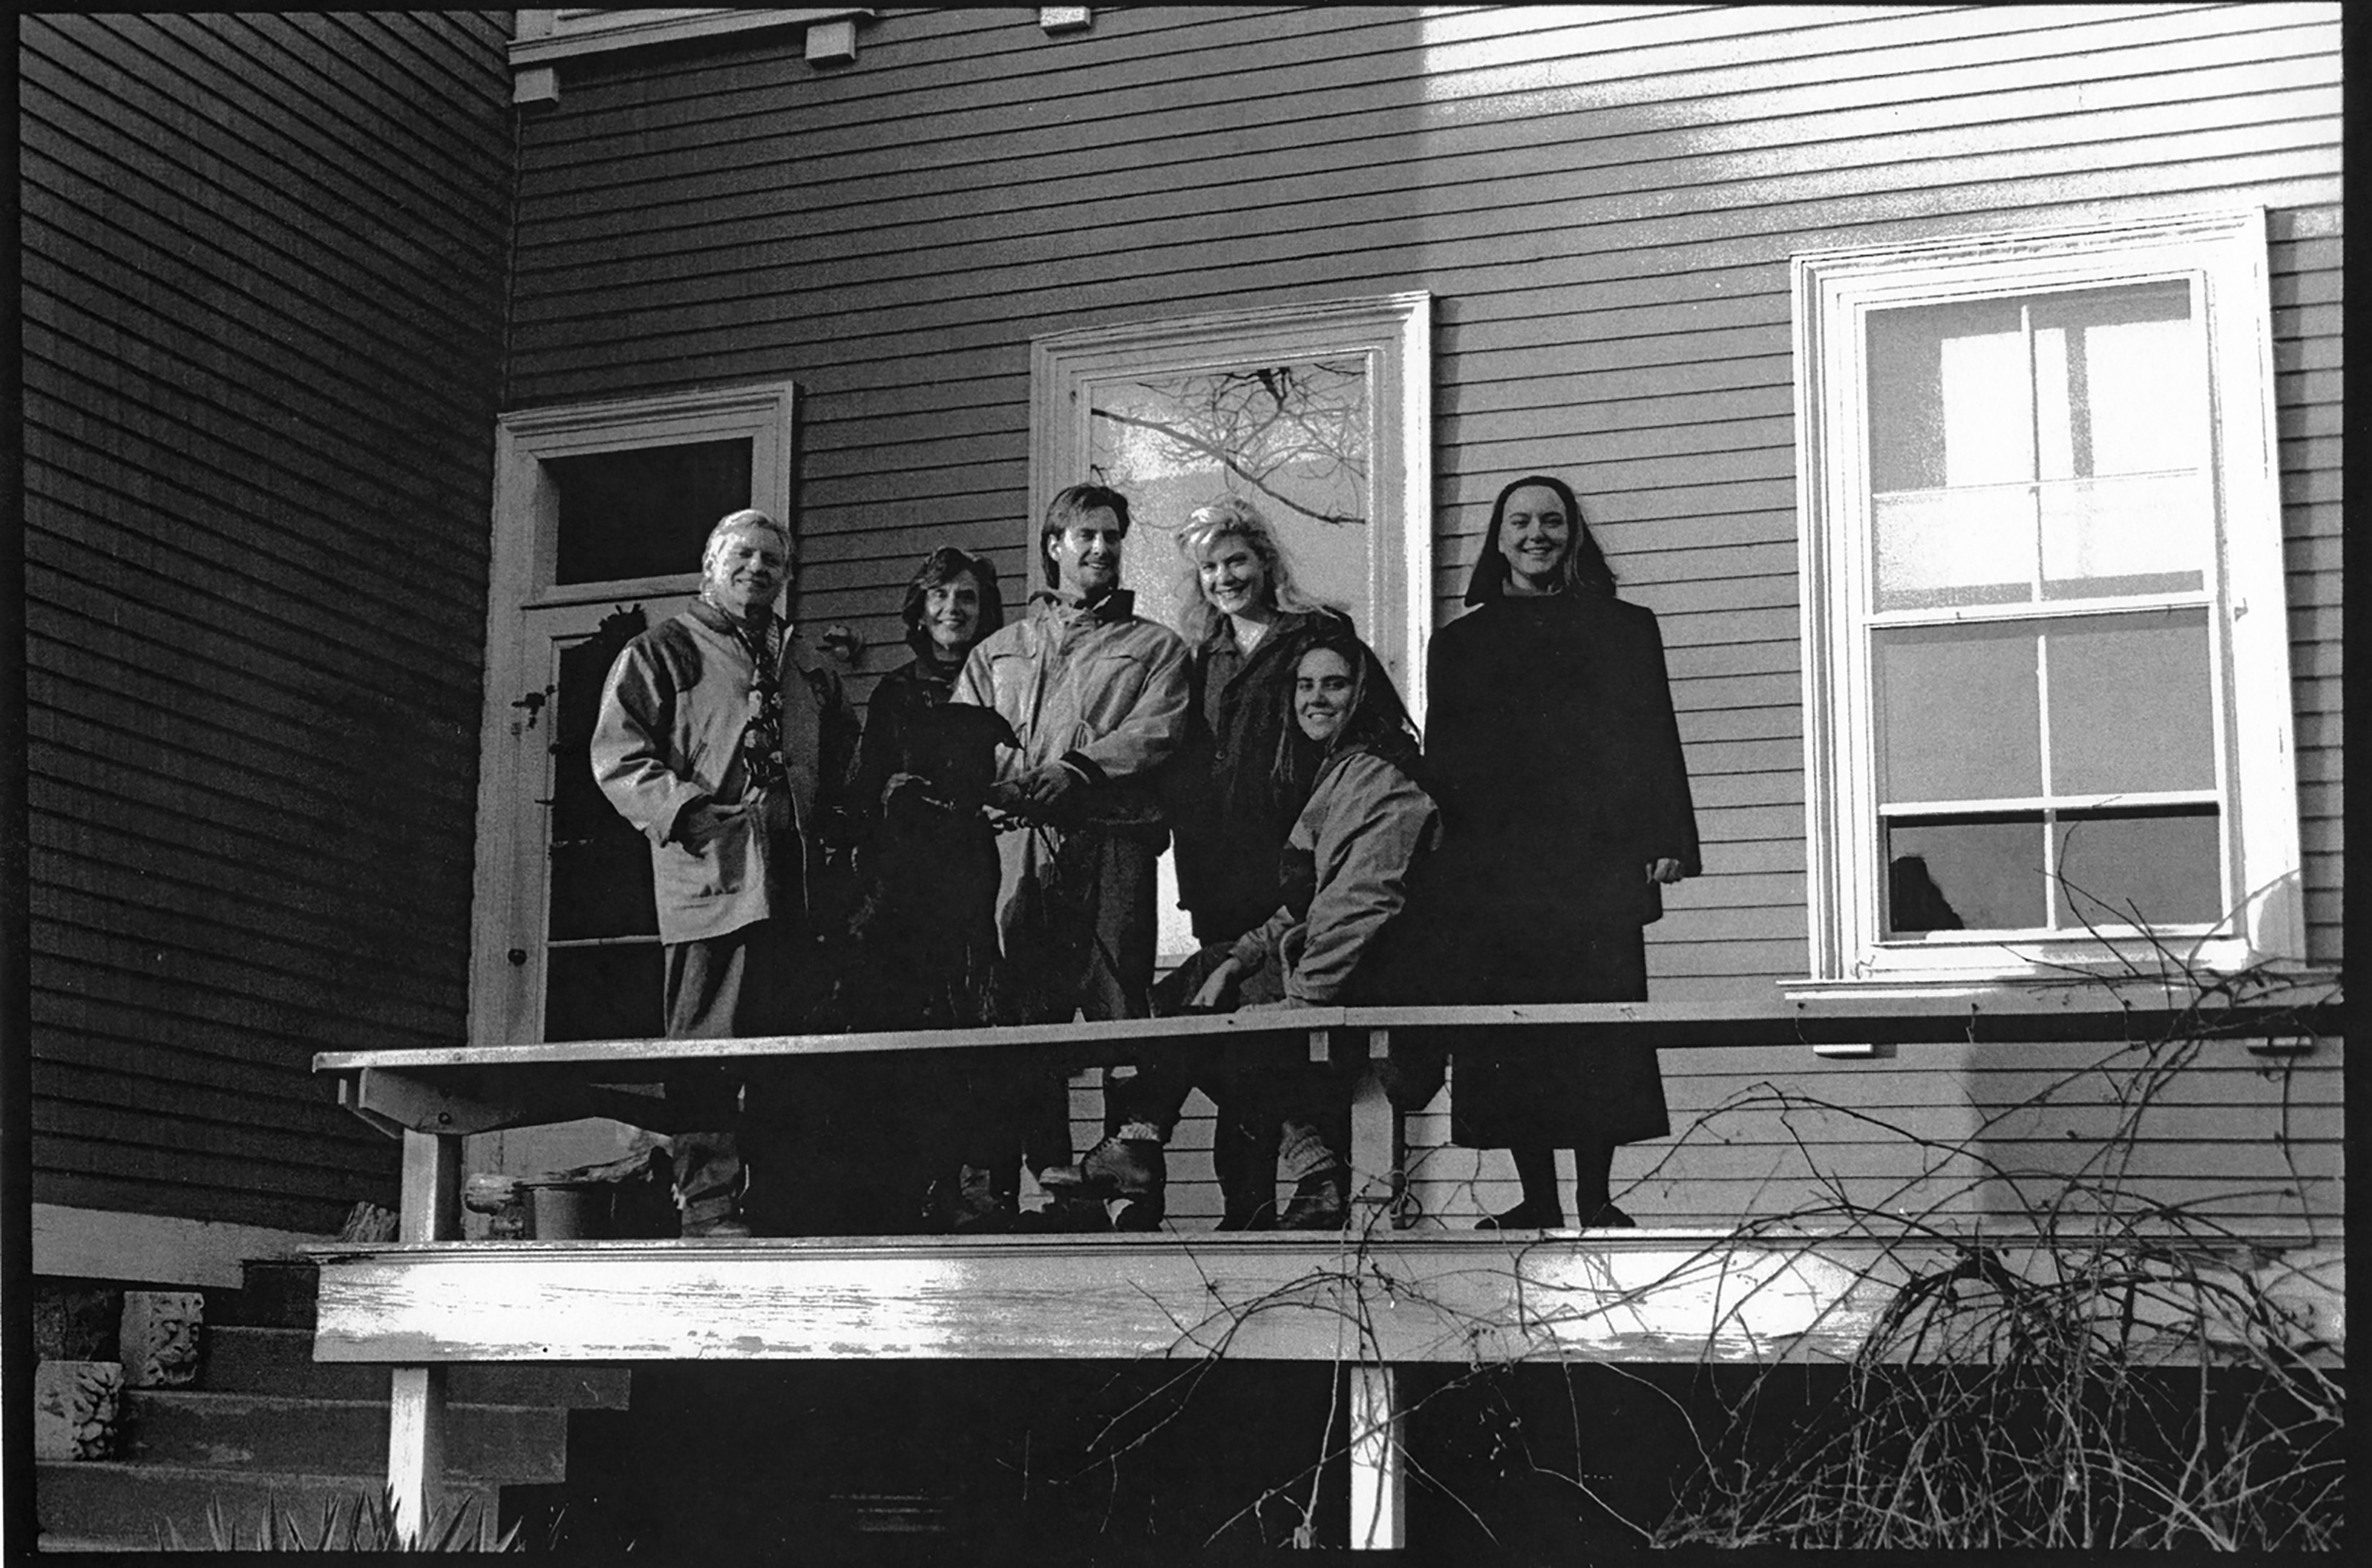   Left to right - JU, Lyn, Aaron, Jessica, Shana, Chryssa, and dog Tosca on back side porch, 900 Hope St, Bristol, RI, Thanksgiving, c. 1989  